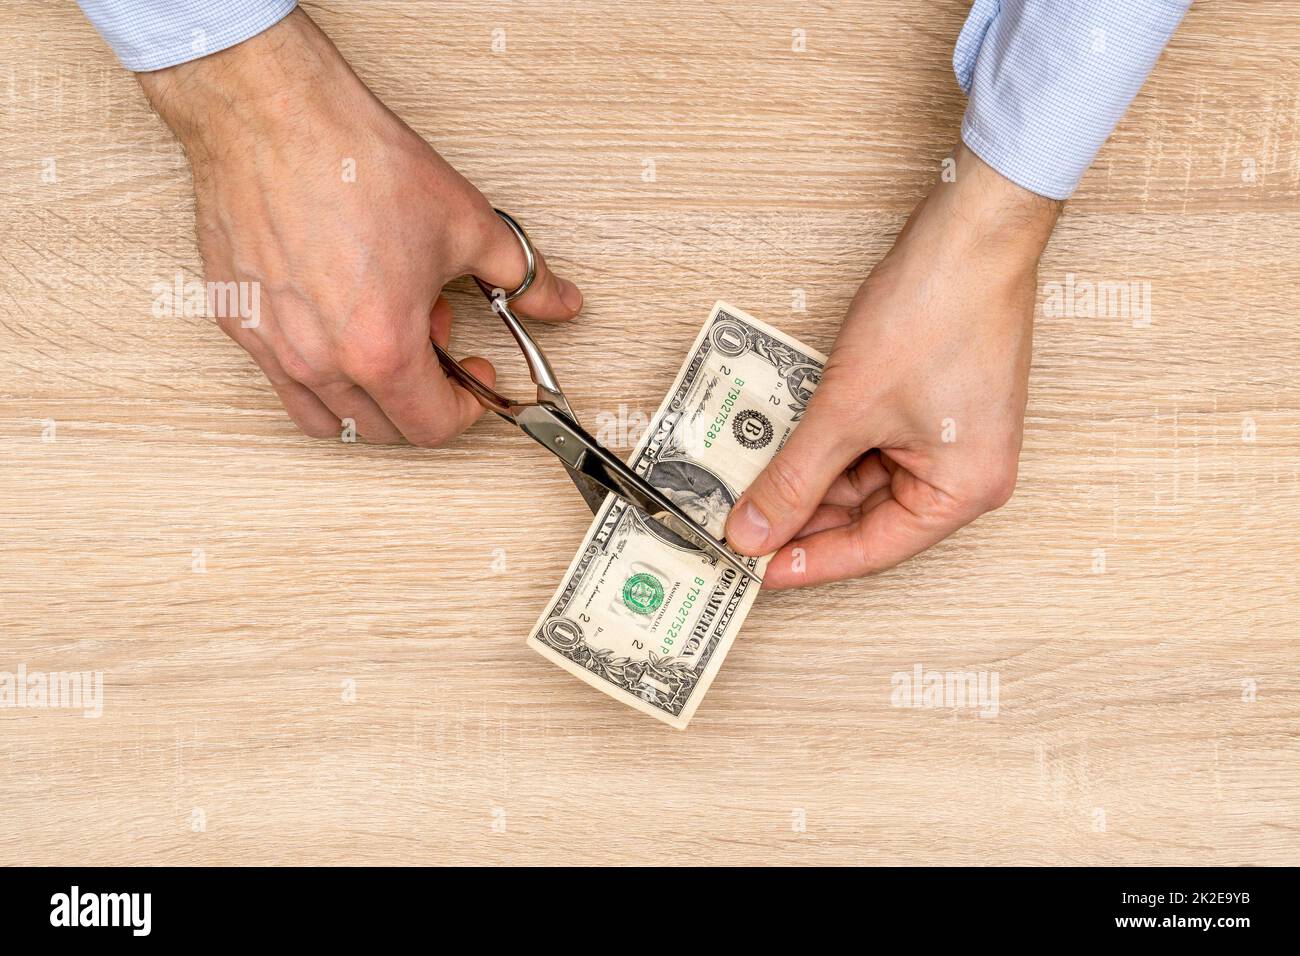 Hands with scissors cutting money Stock Photo